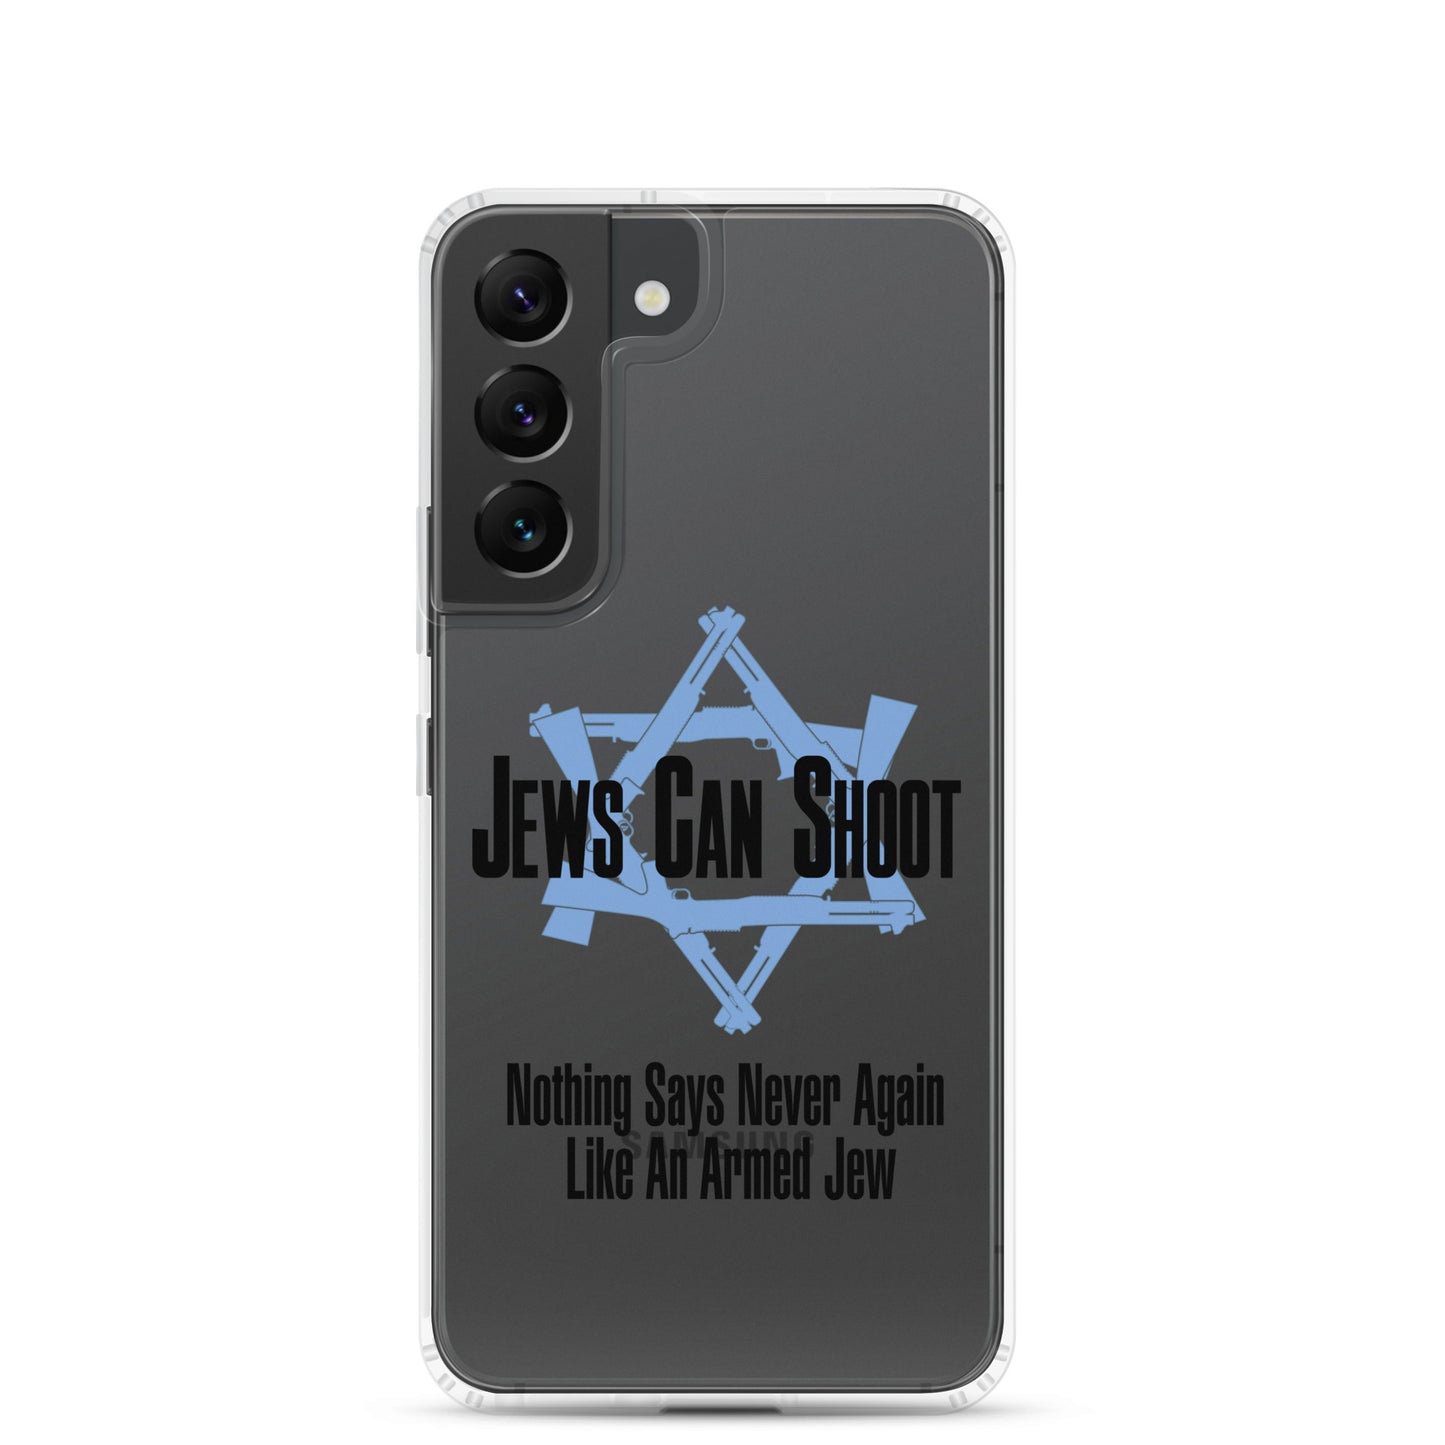 Clear Case for Samsung® with Jews Can Shoot logo and motto